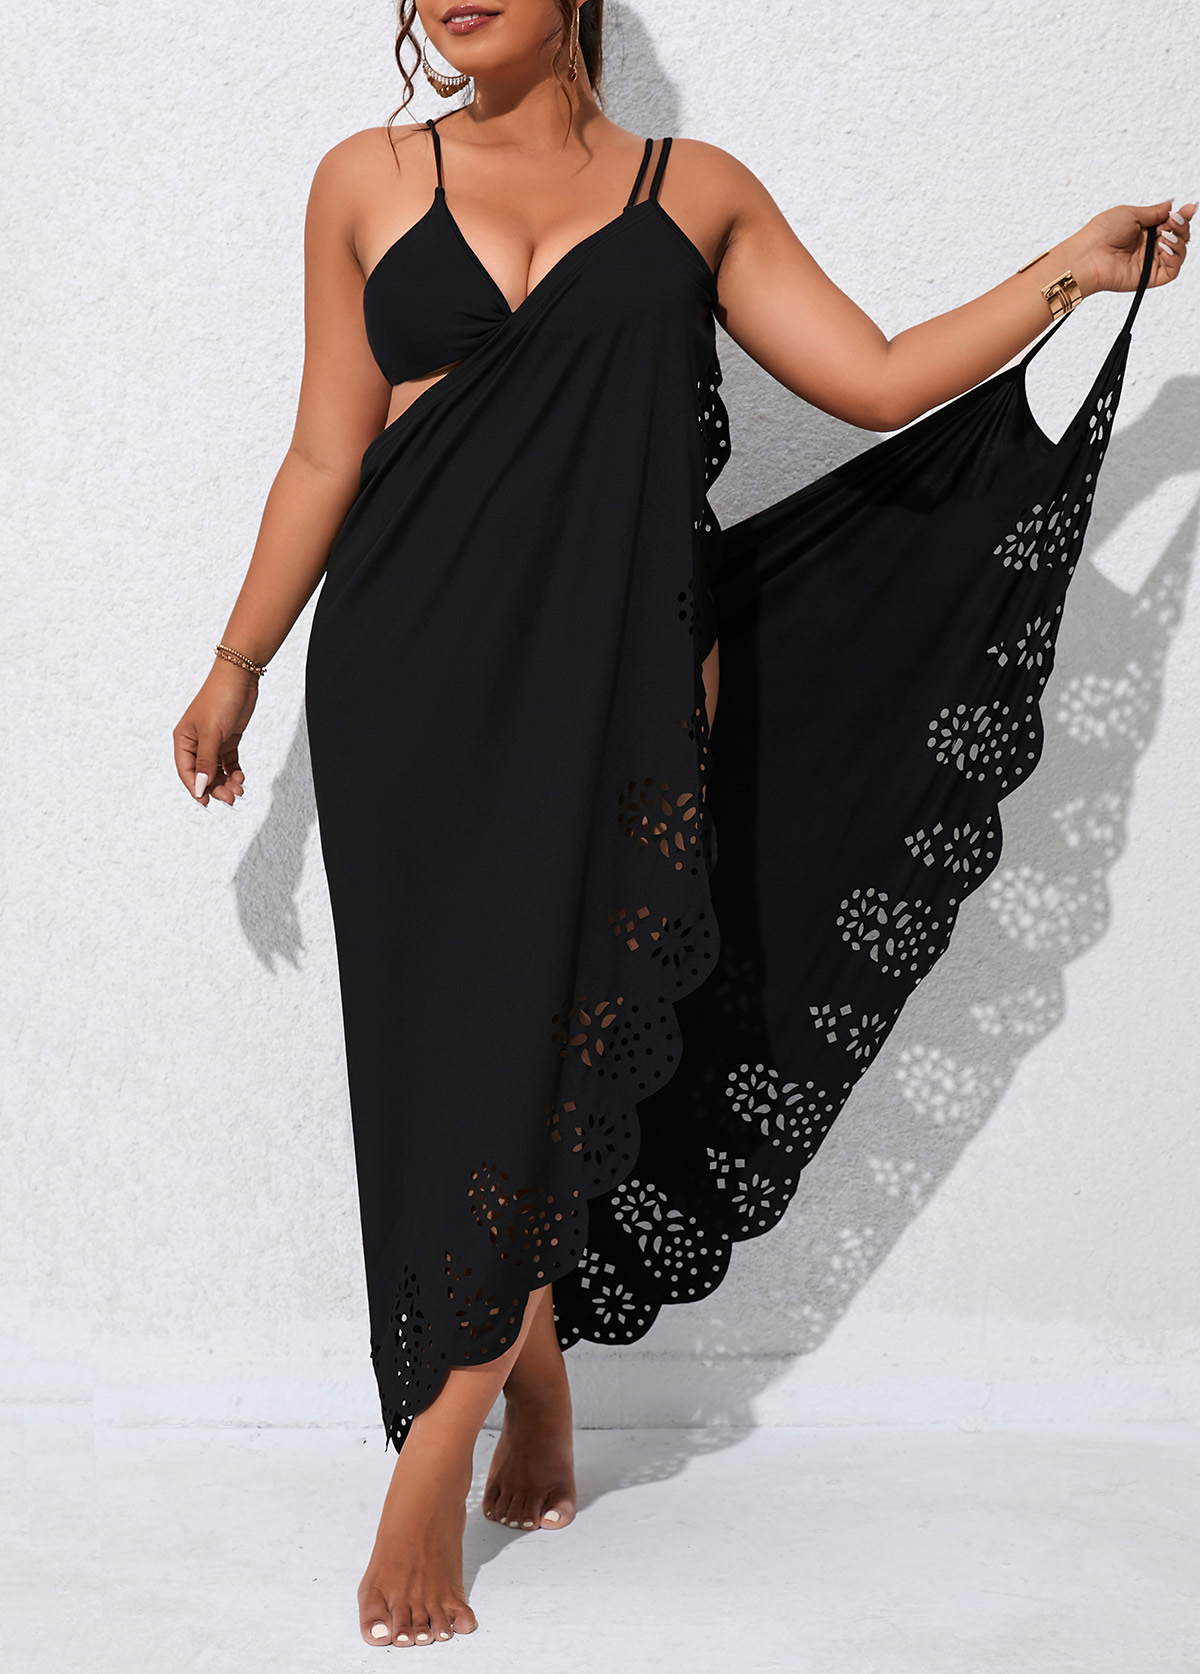 Plus Size Burn Out Printing Black Cover Up